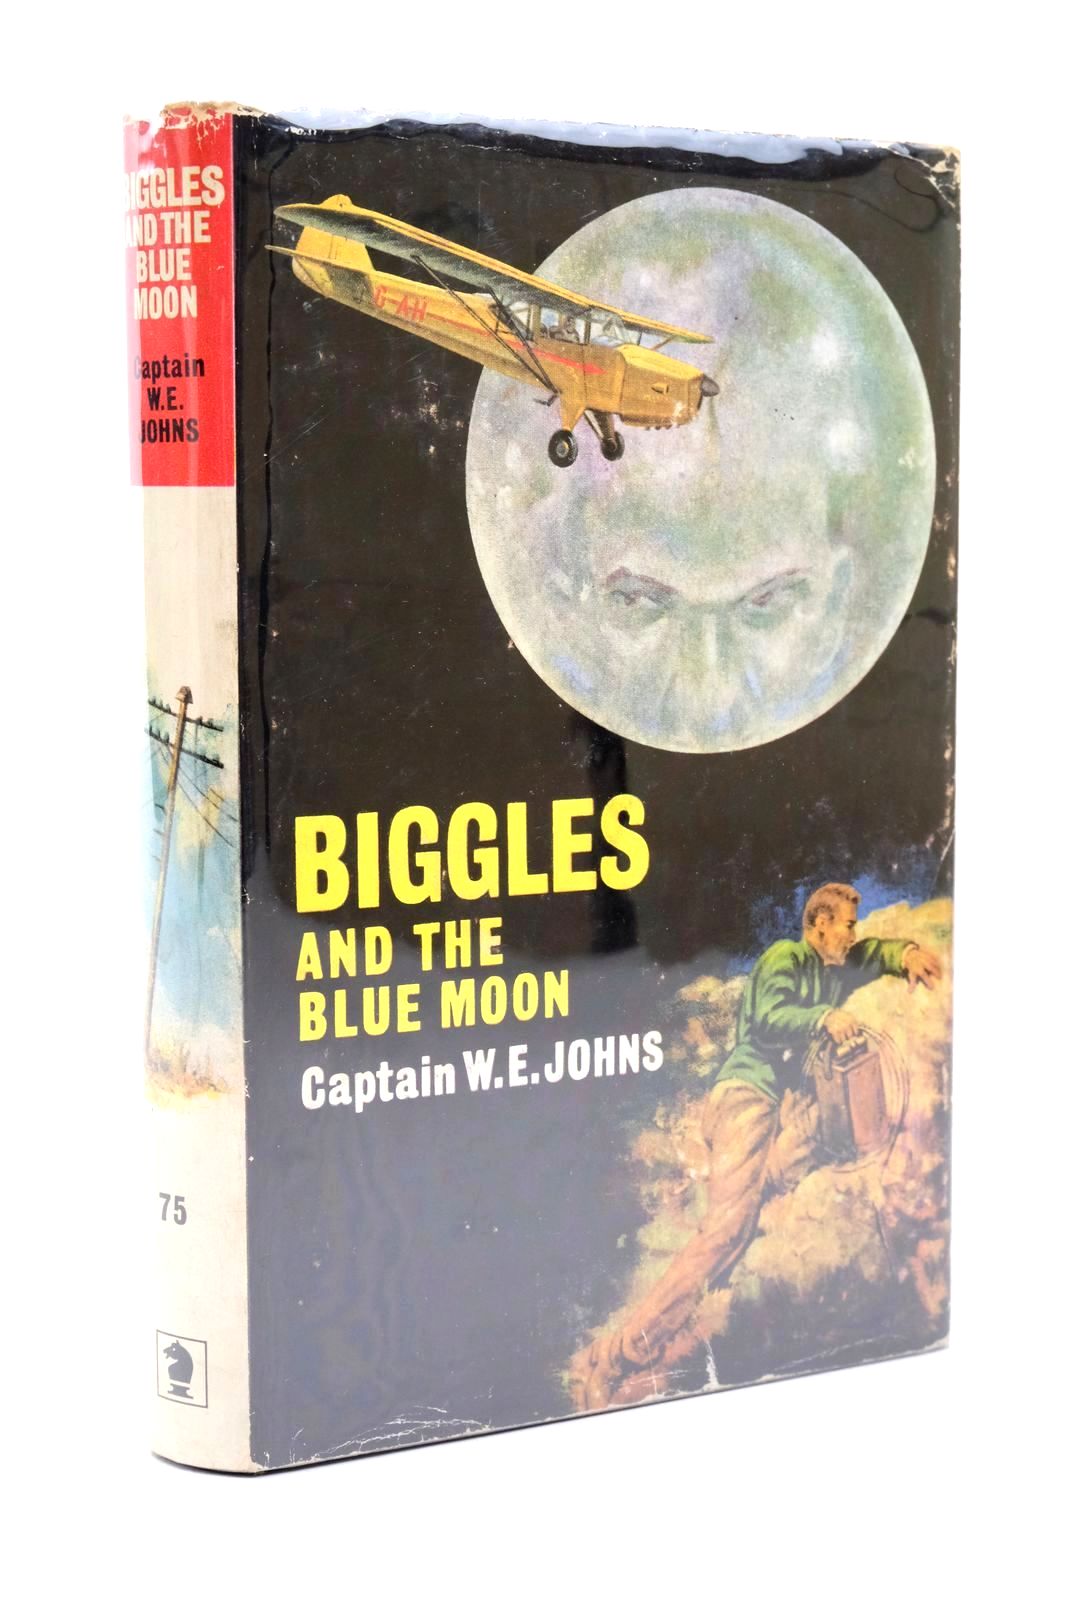 Photo of BIGGLES AND THE BLUE MOON written by Johns, W.E. published by Brockhampton Press (STOCK CODE: 1322740)  for sale by Stella & Rose's Books